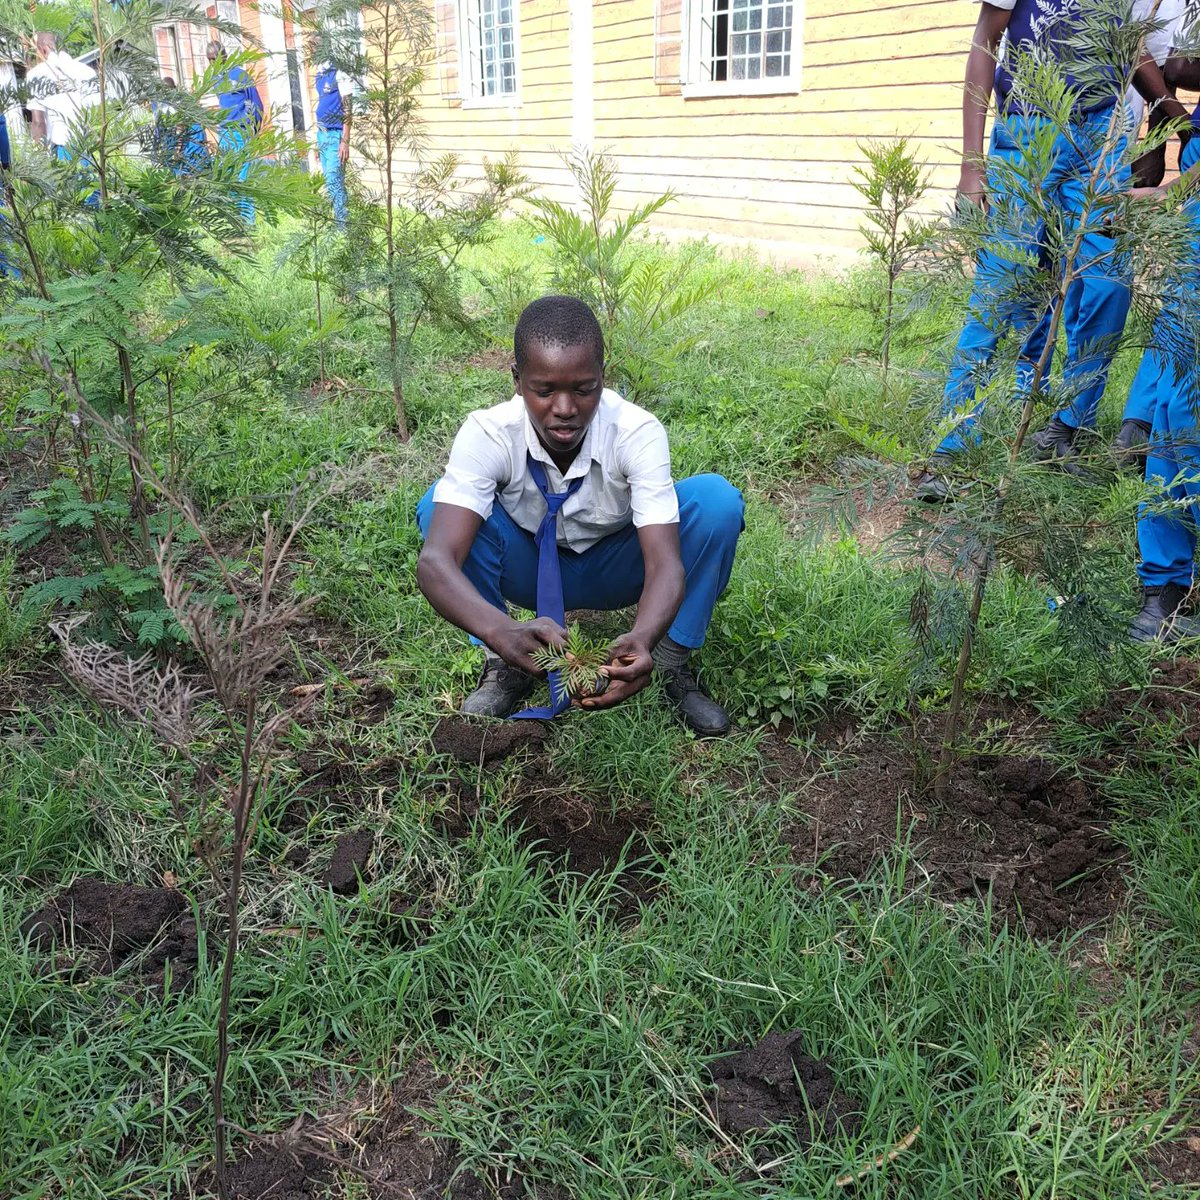 In every school we visit and provide students with environmental information, we ensure to wrap it up with a tree planting event.

#FaceOutEcosystemImbalance
#OurSharedWorld